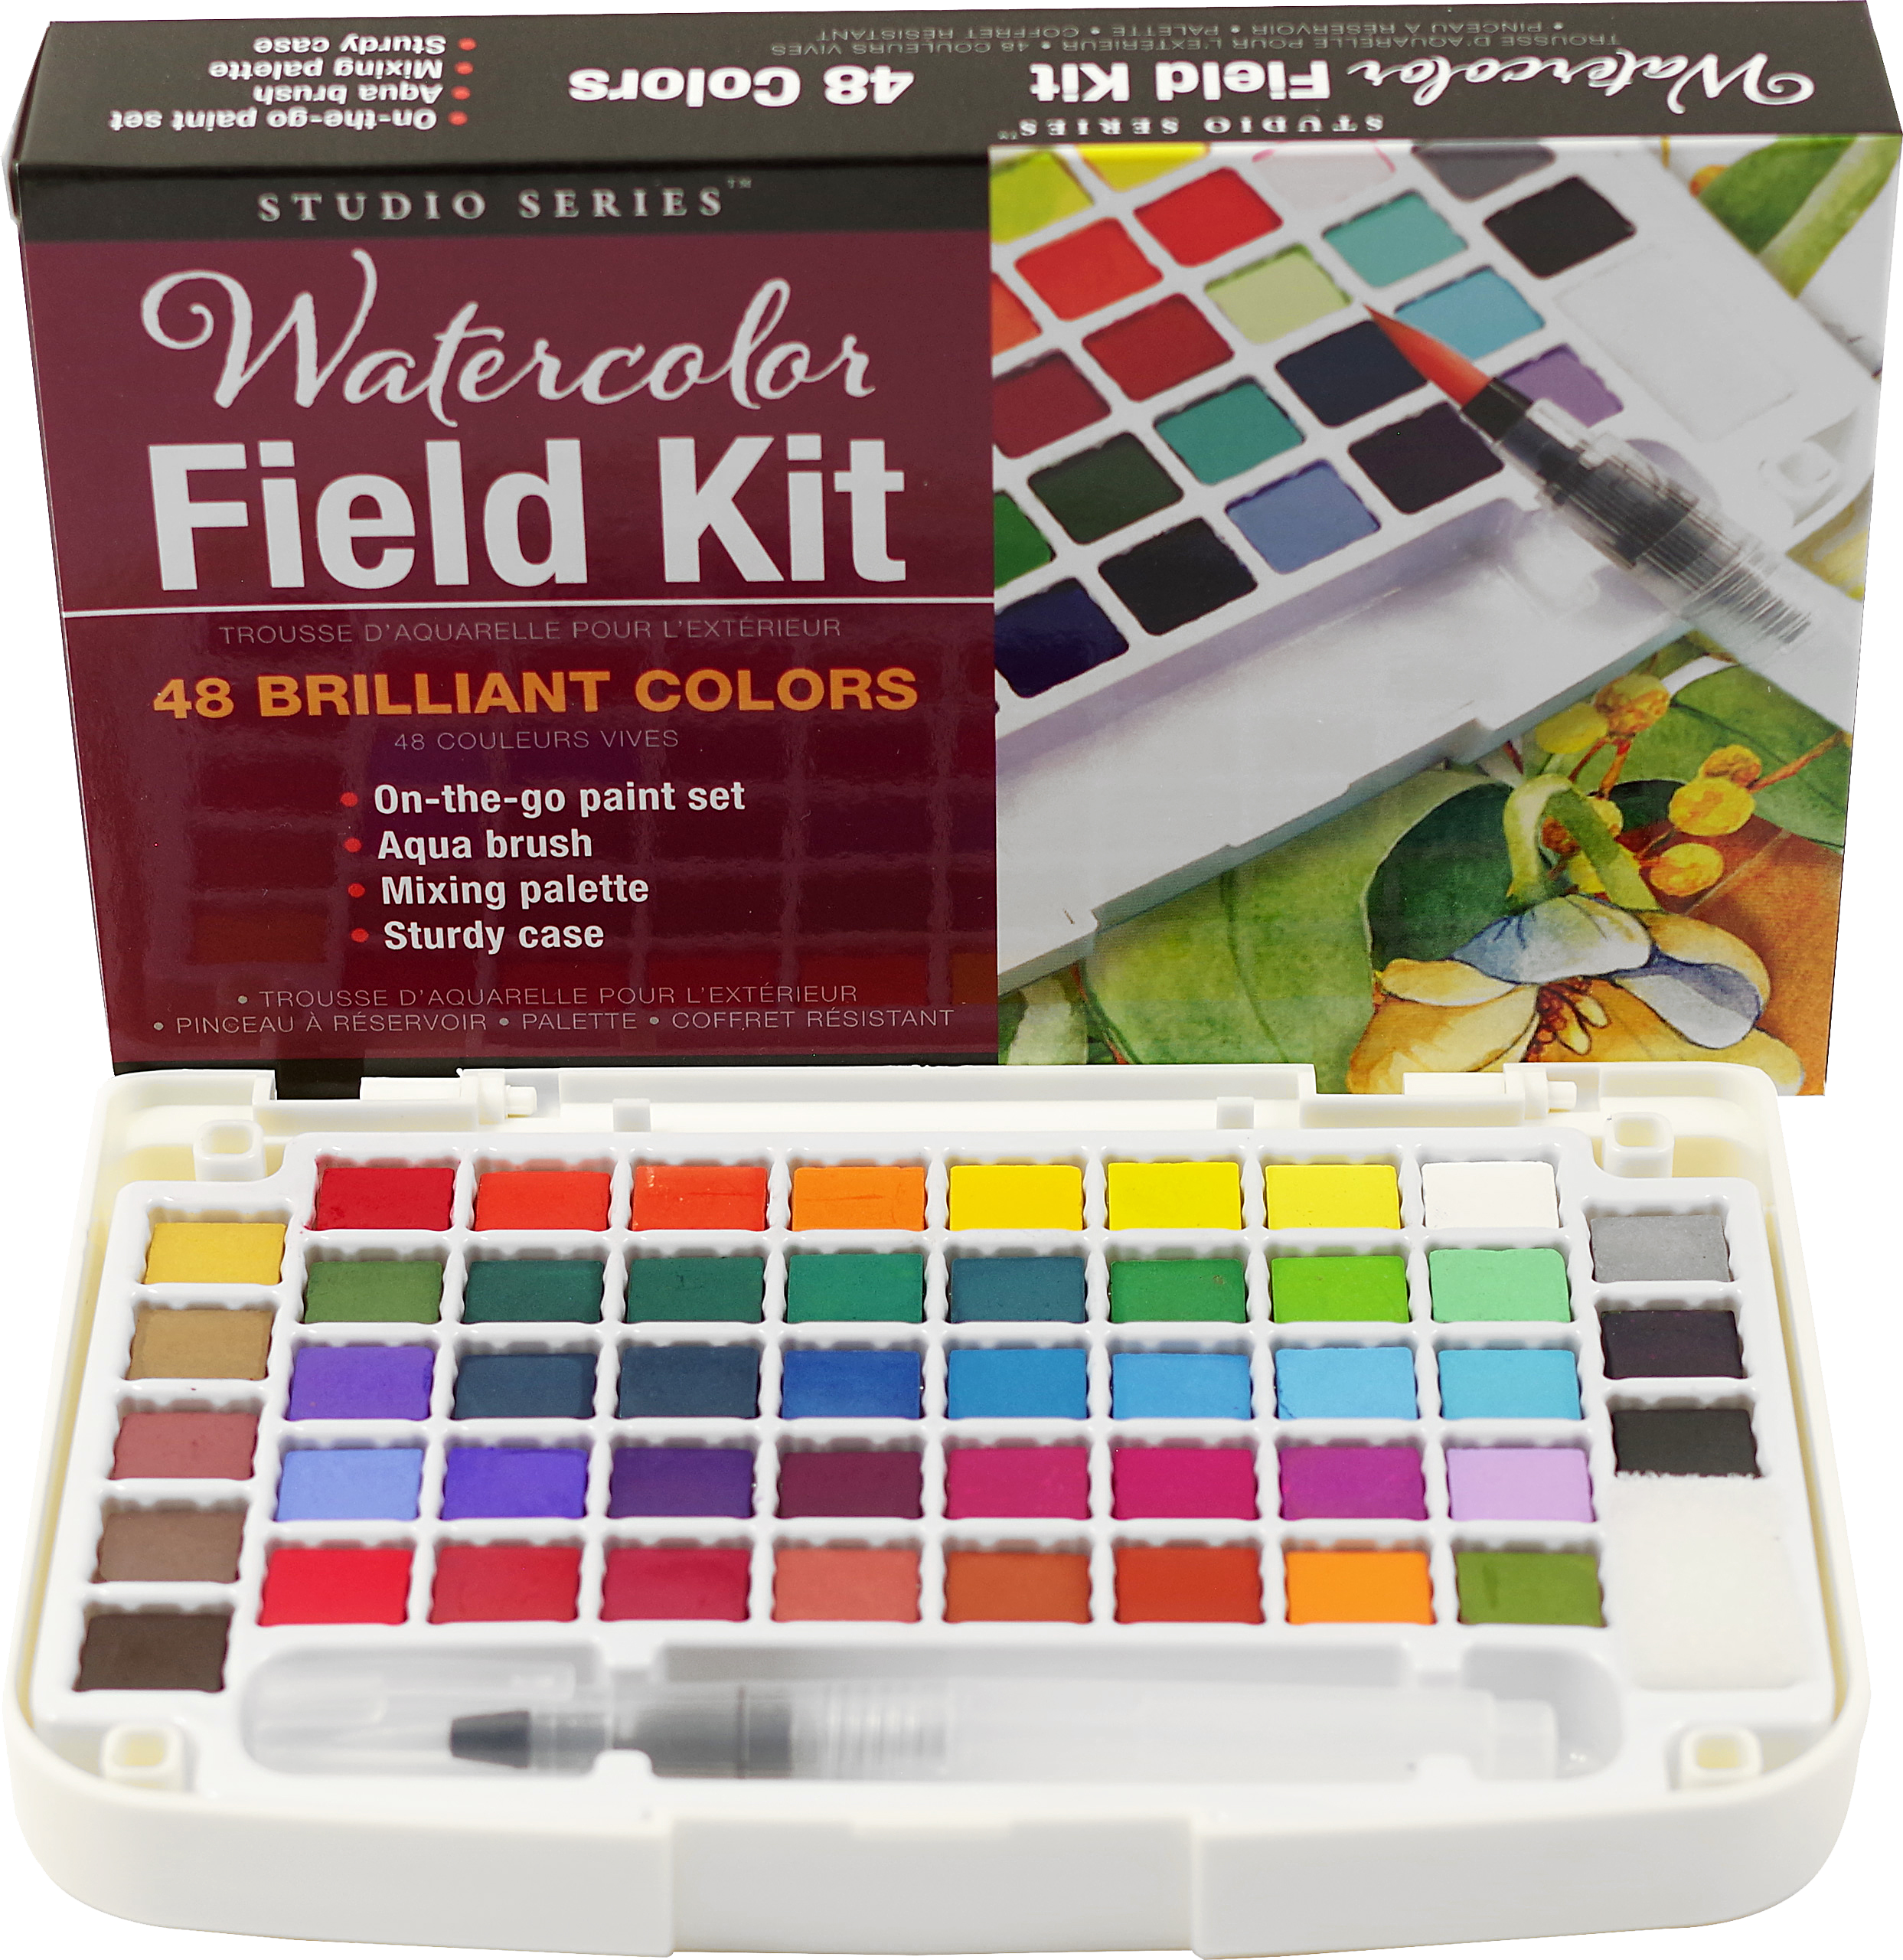 Watercolor kit in Tin Box - Set of 48 watercolor paint pieces